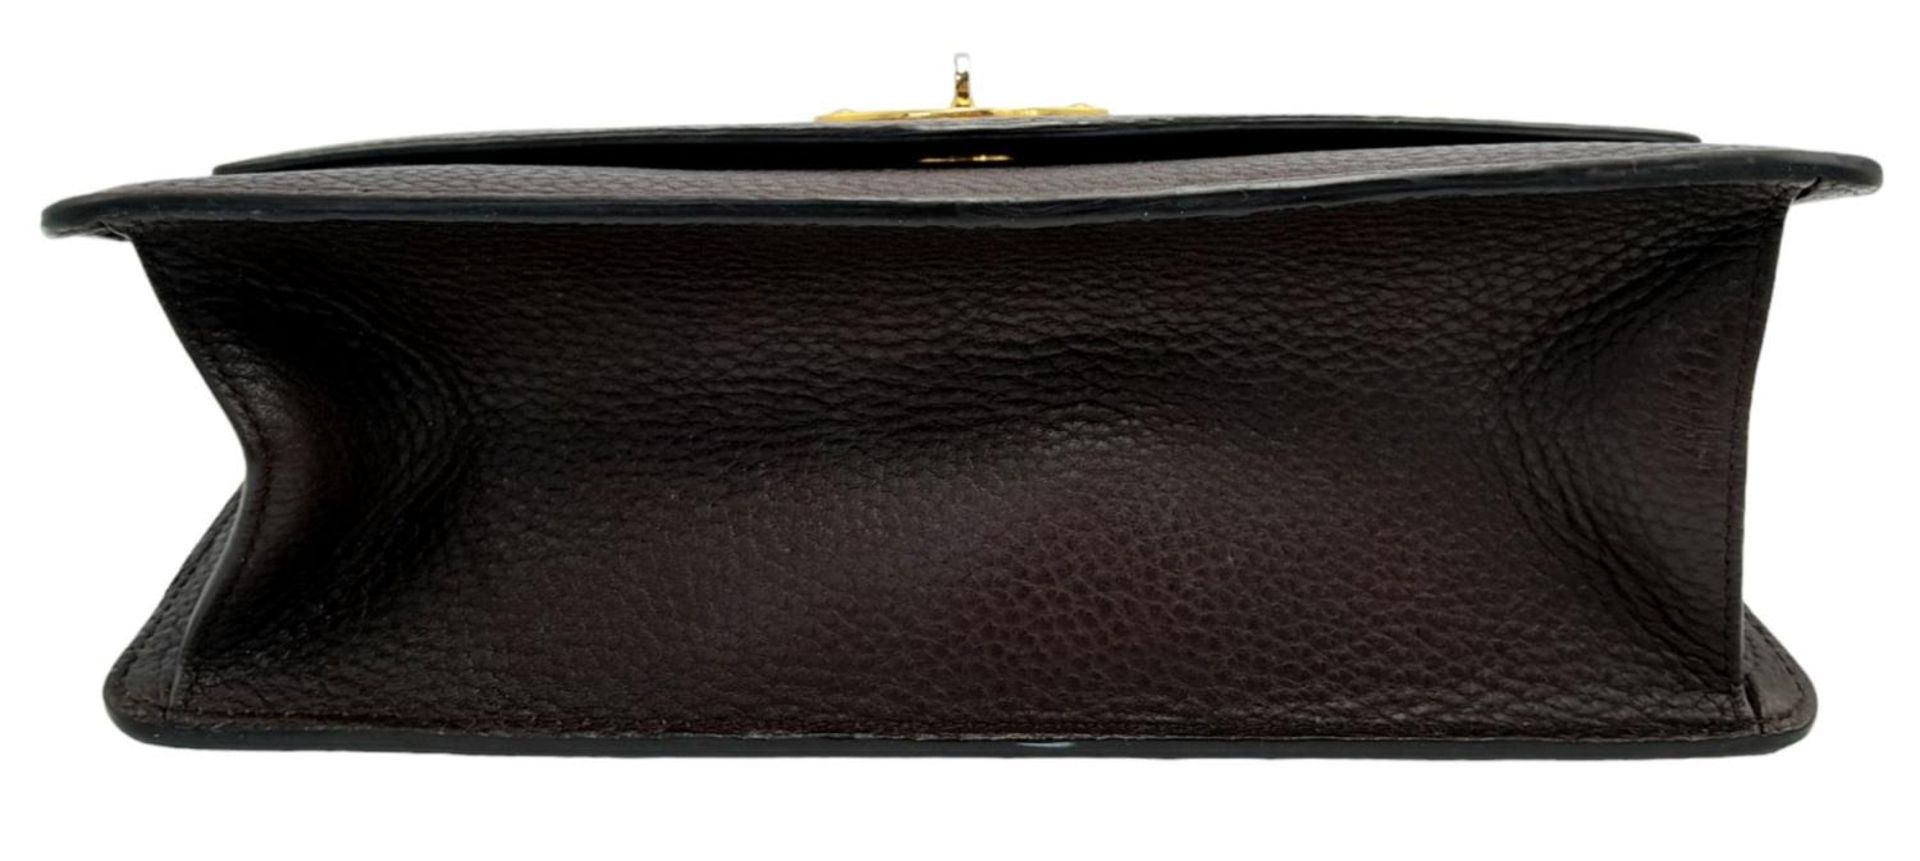 A Mulberry Oxblood Darley Bag. Leather exterior with gold-toned hardware and twist lock closure. - Image 4 of 10